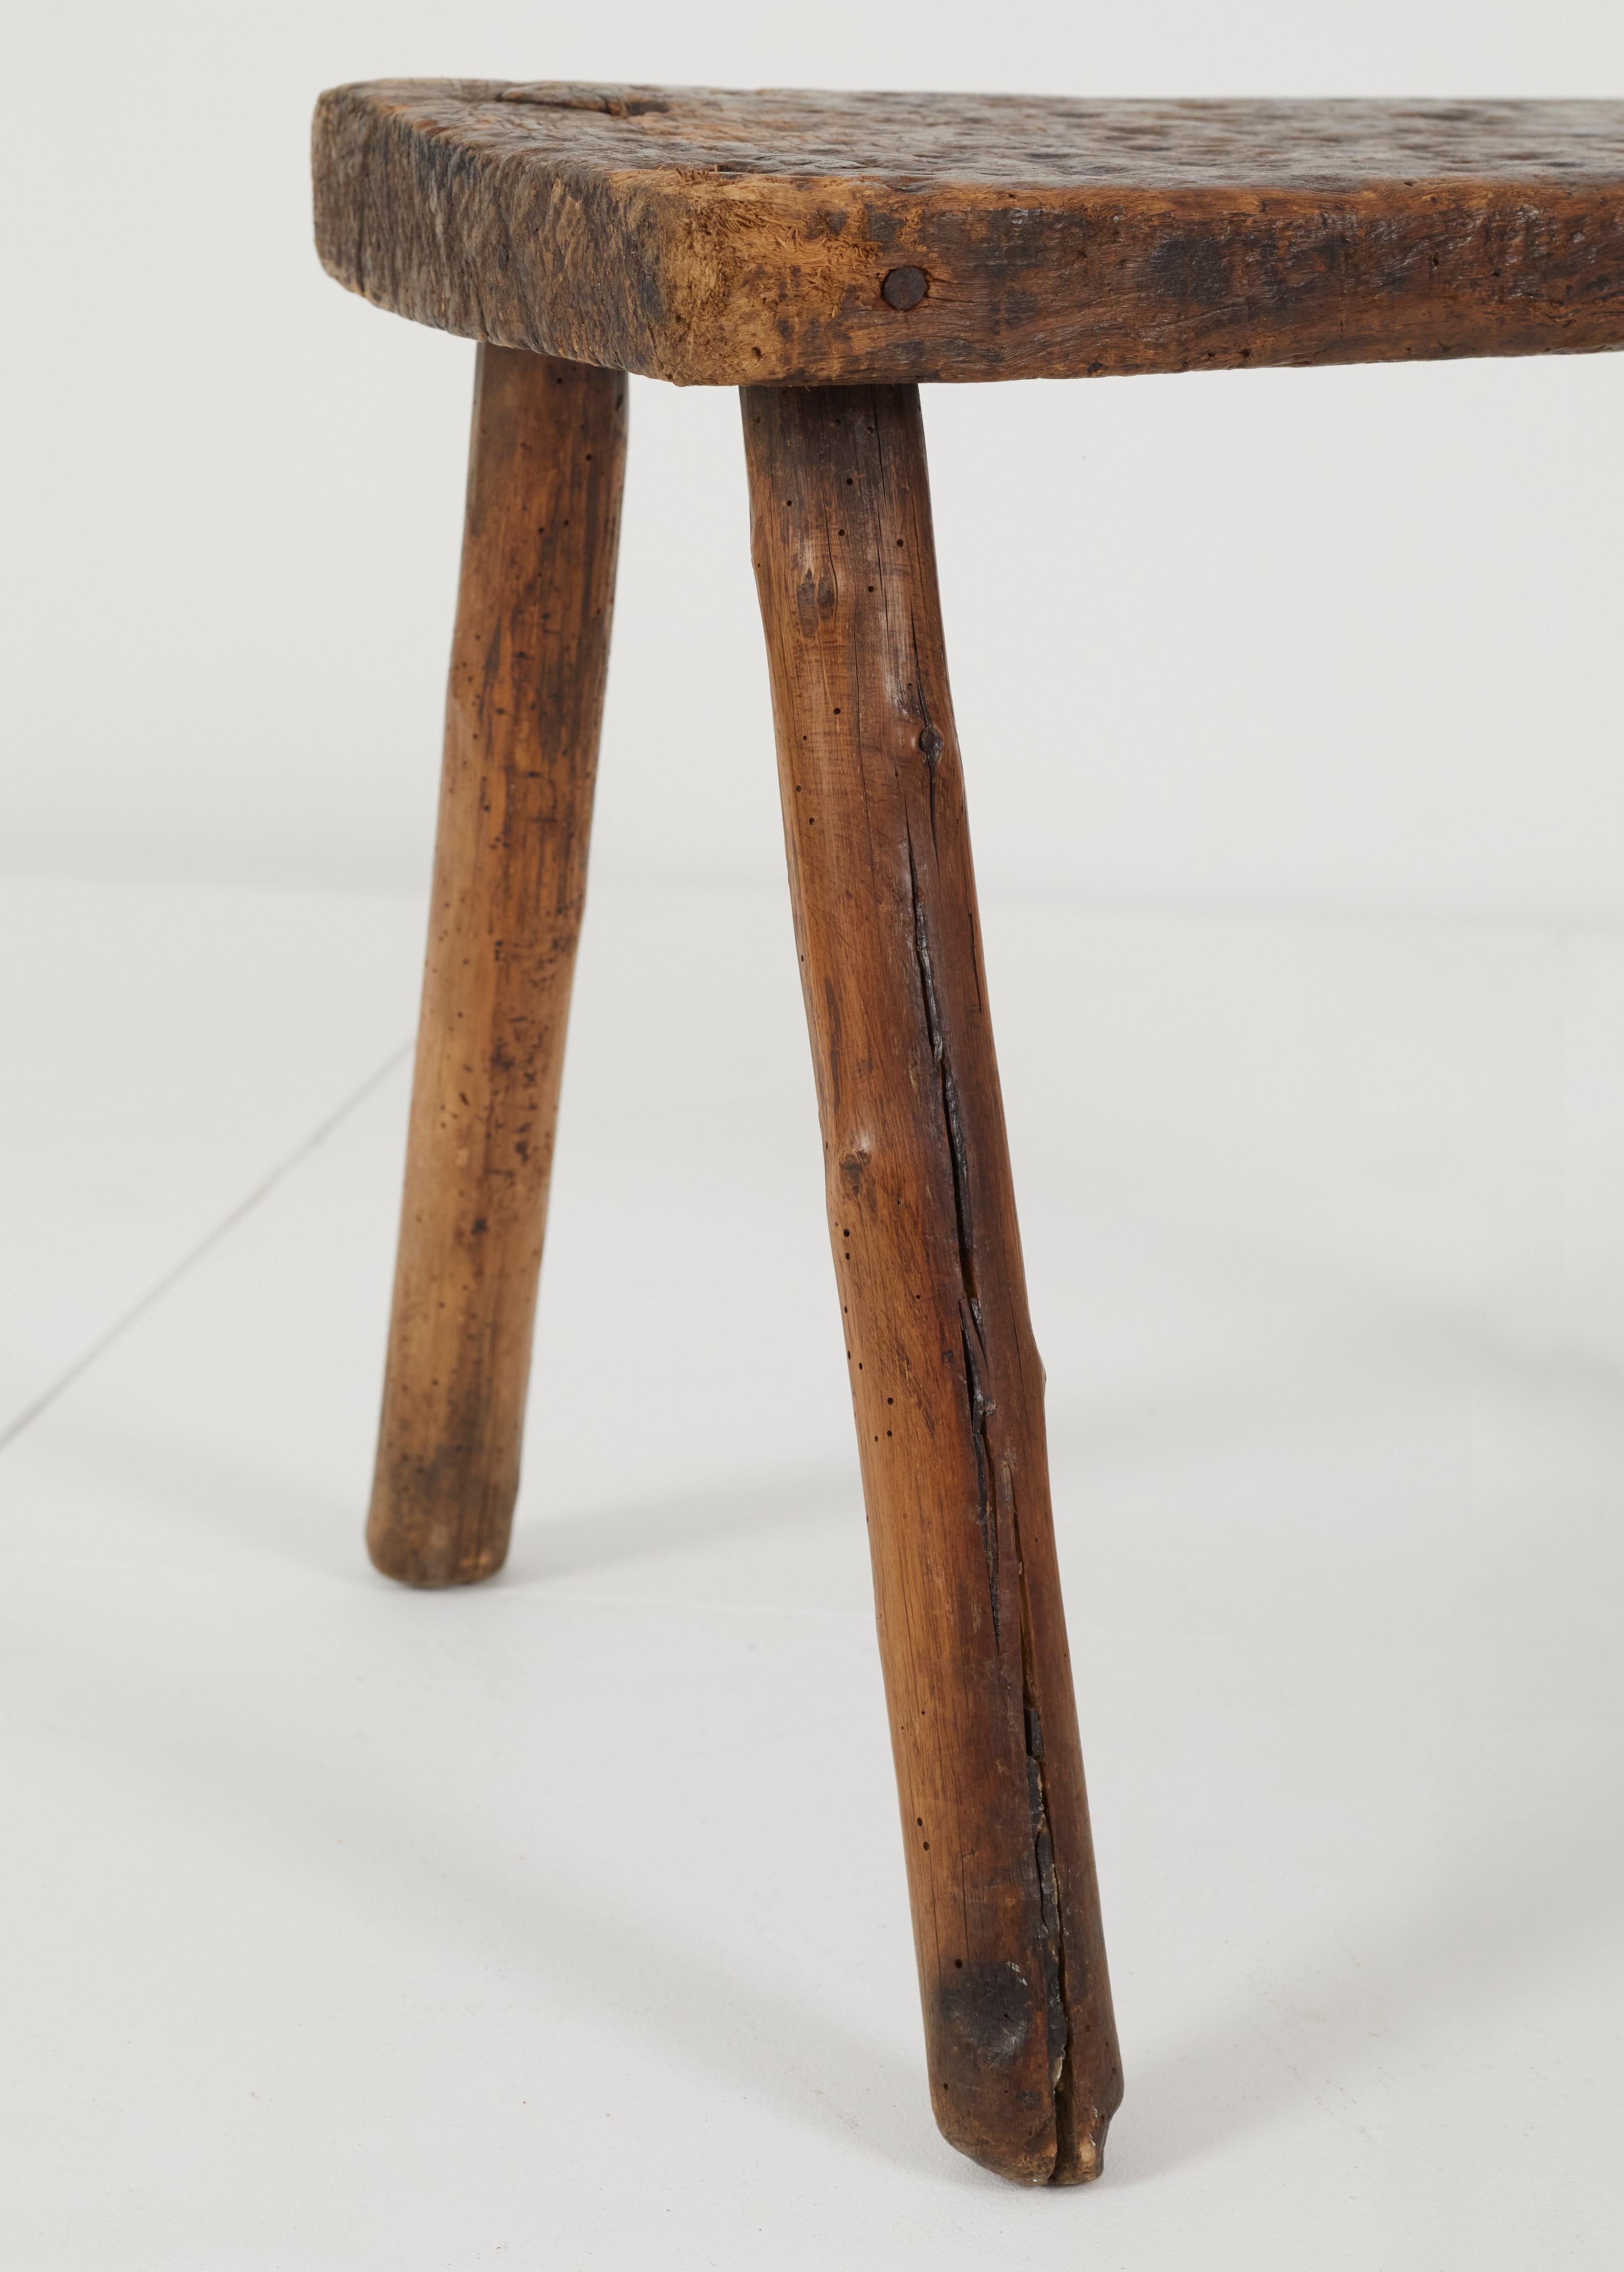 Primitive, Rustic, Antique Bench / Stool, France, 19th Century For Sale 1